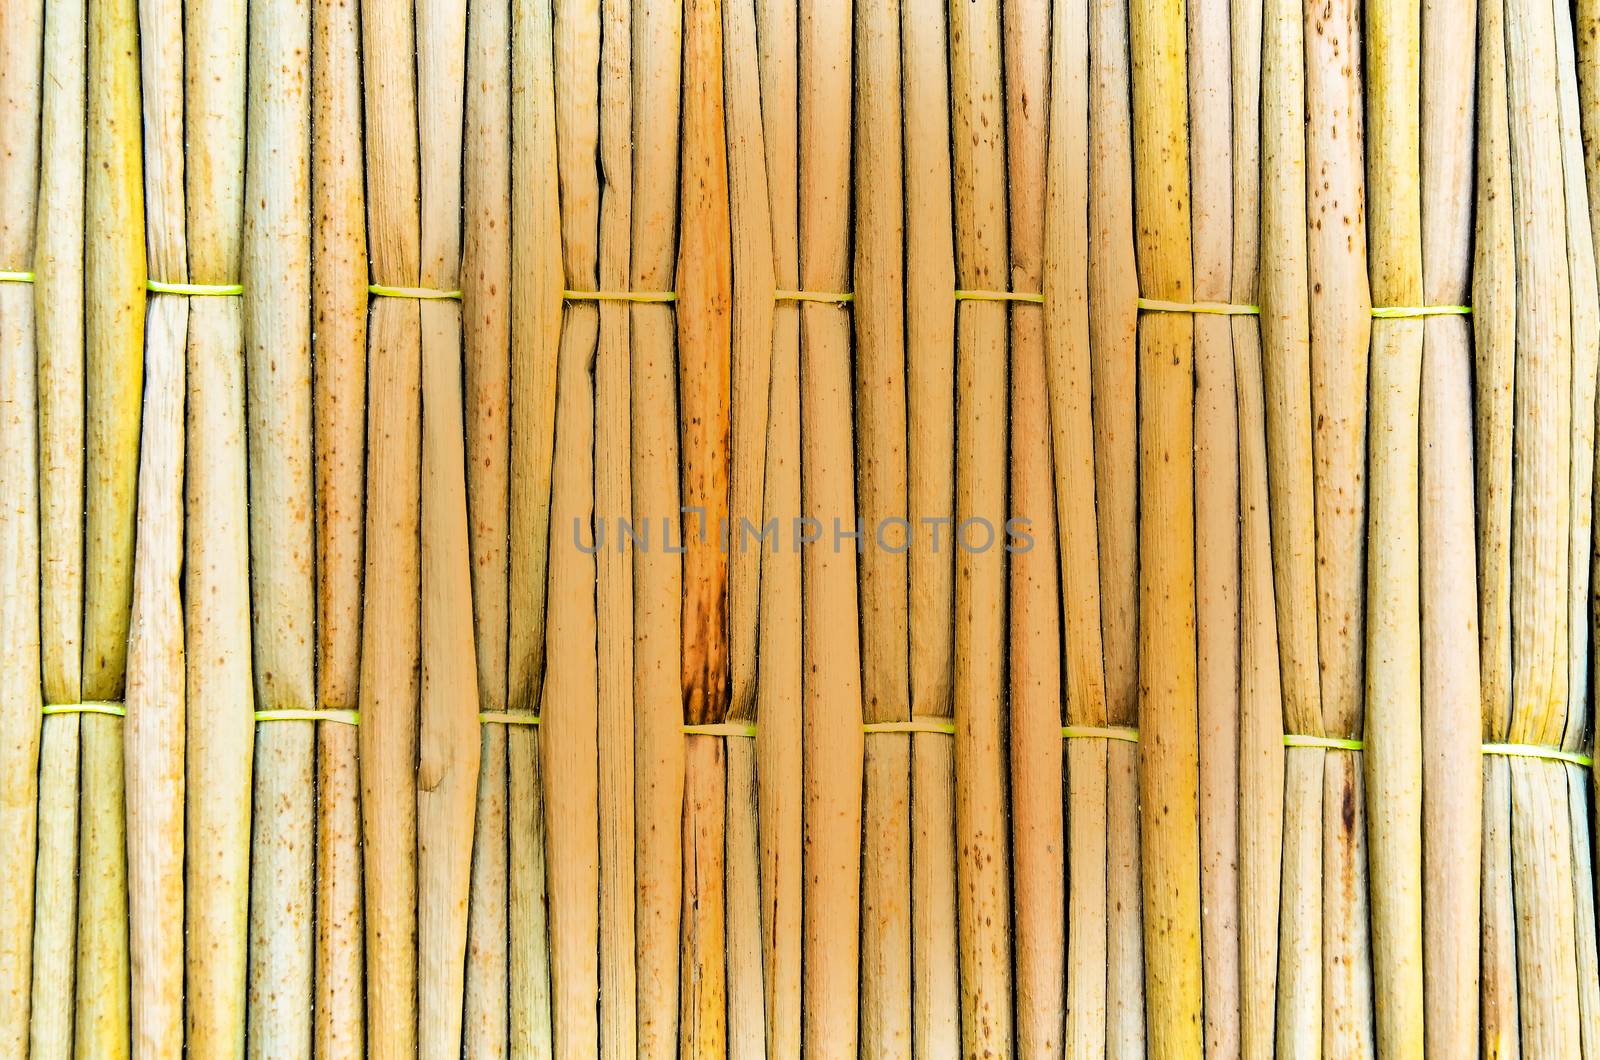 Straw made floor mate of East Asia by raweenuttapong